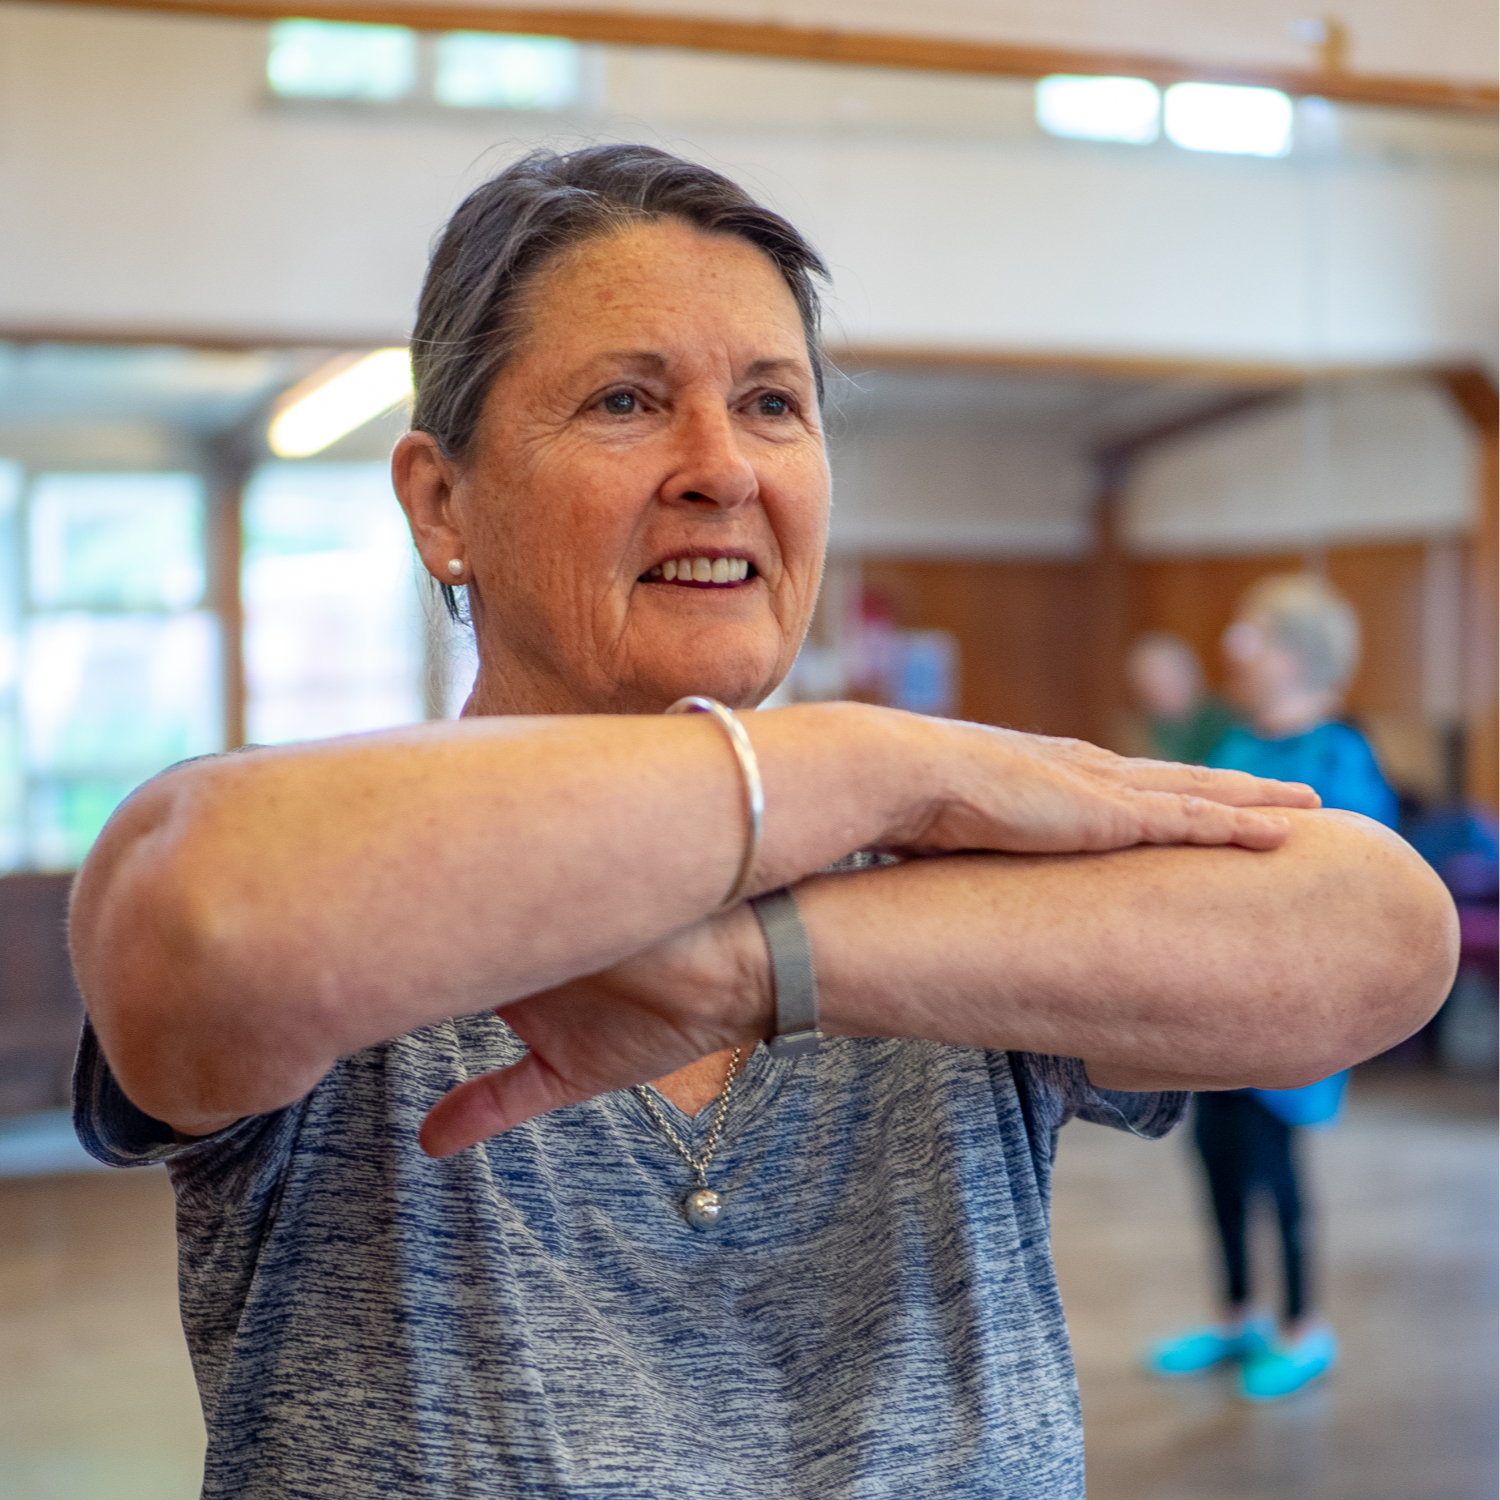 A pakeha woman in a grey Tshirt holds her arms up folded in front of her